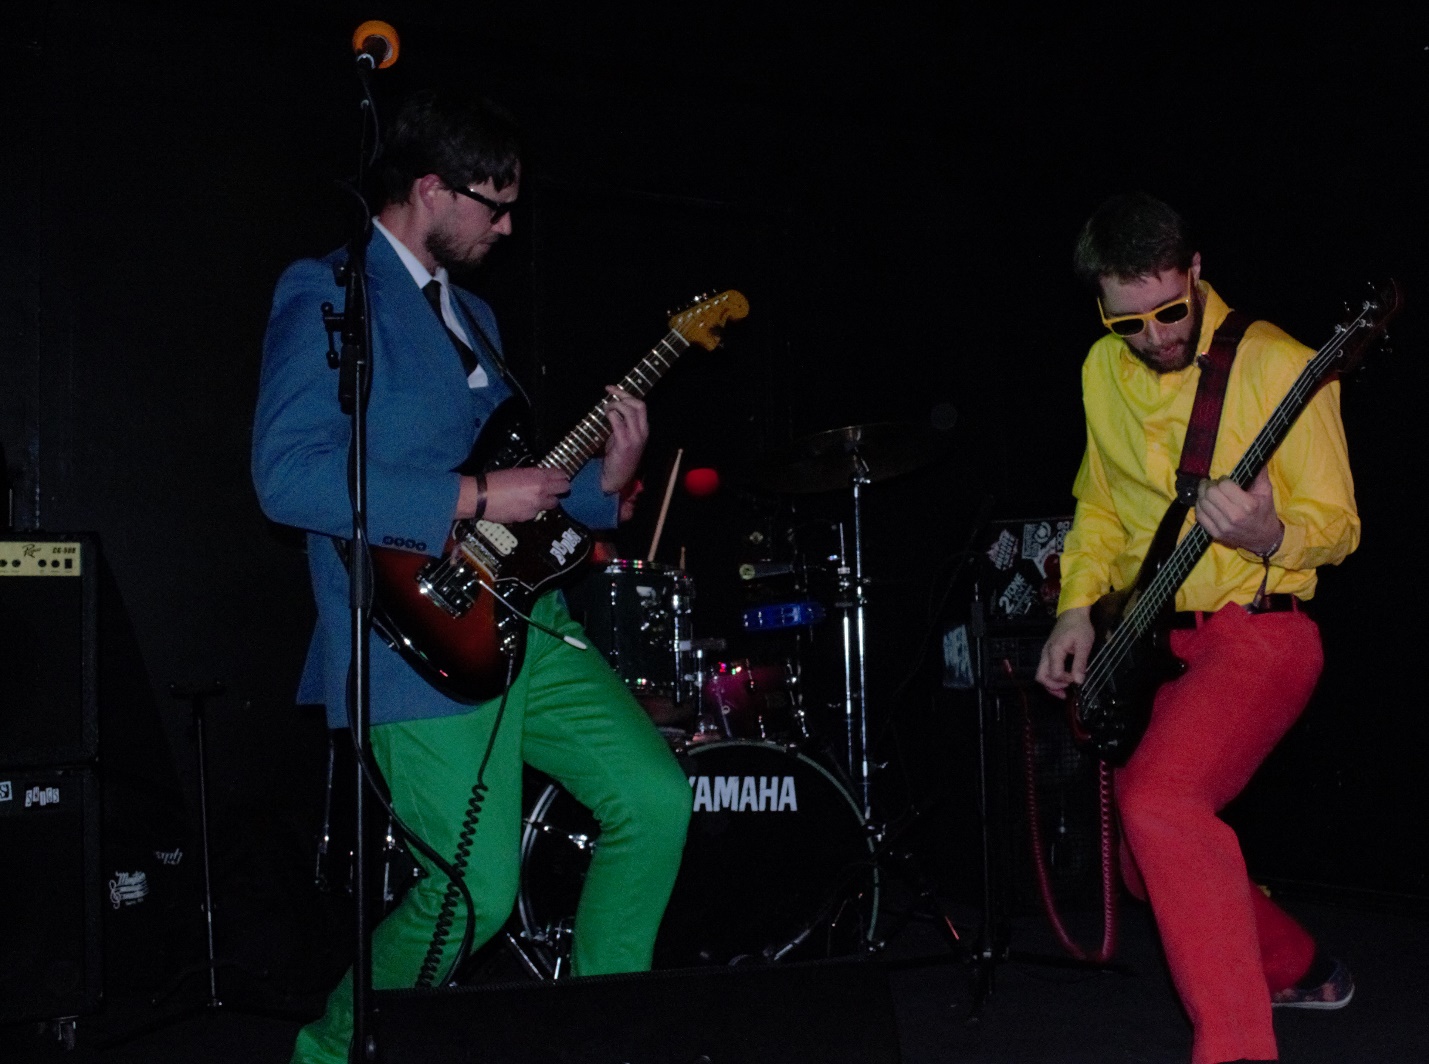 Two guys in brightly colored clothes playing their guitars